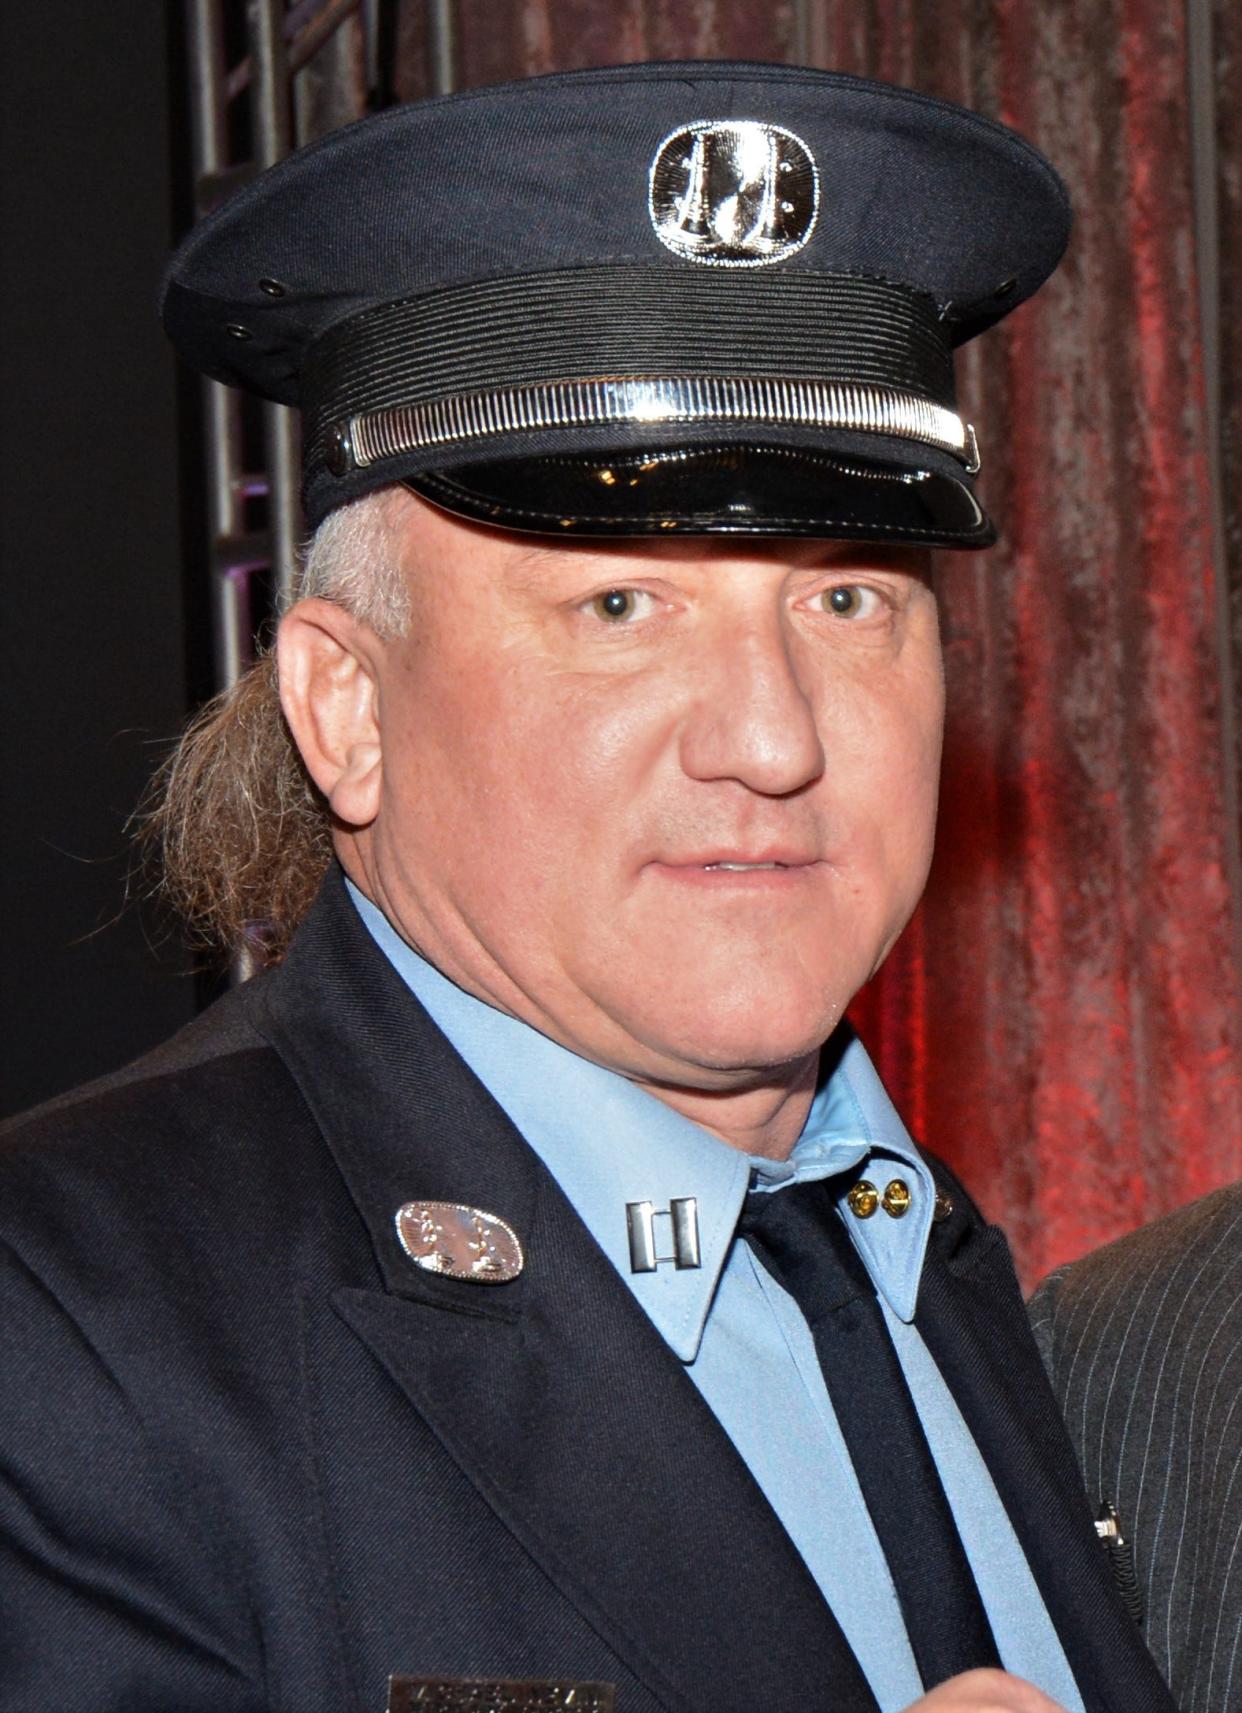 Mike Nevin, former president of the Detroit Fire Fighters Association, a union of the city's firefighters, poses in his dress uniform in about 2015.